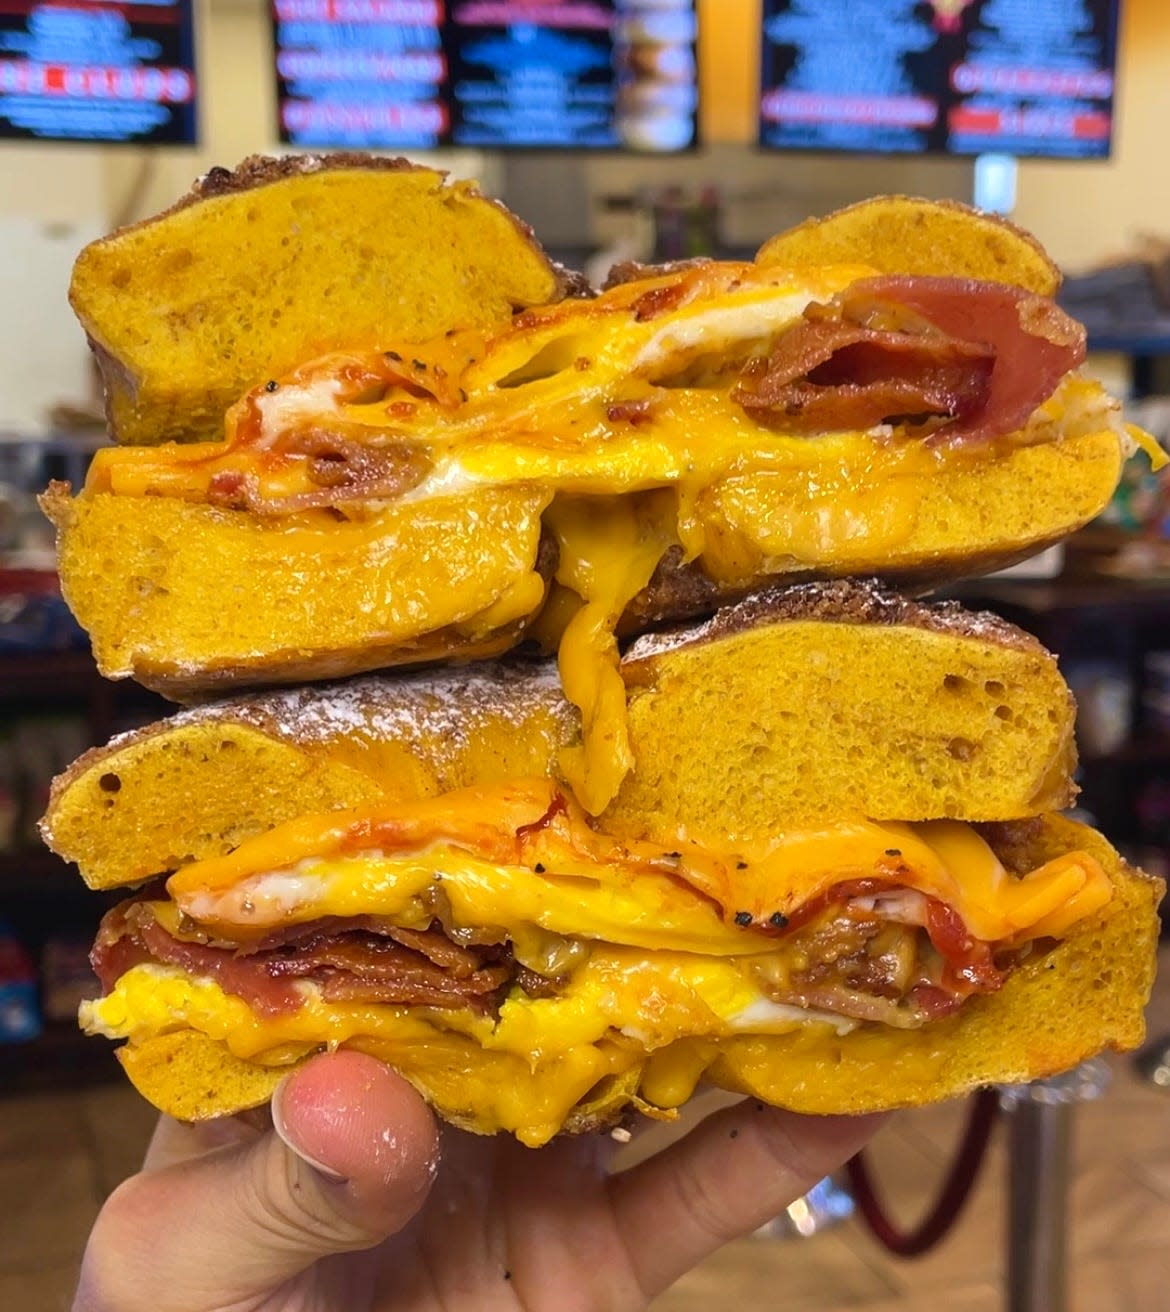 Bacon, Egg and Cheese Sandwich on a French Toast Bagel at Brooklyn Bagel.